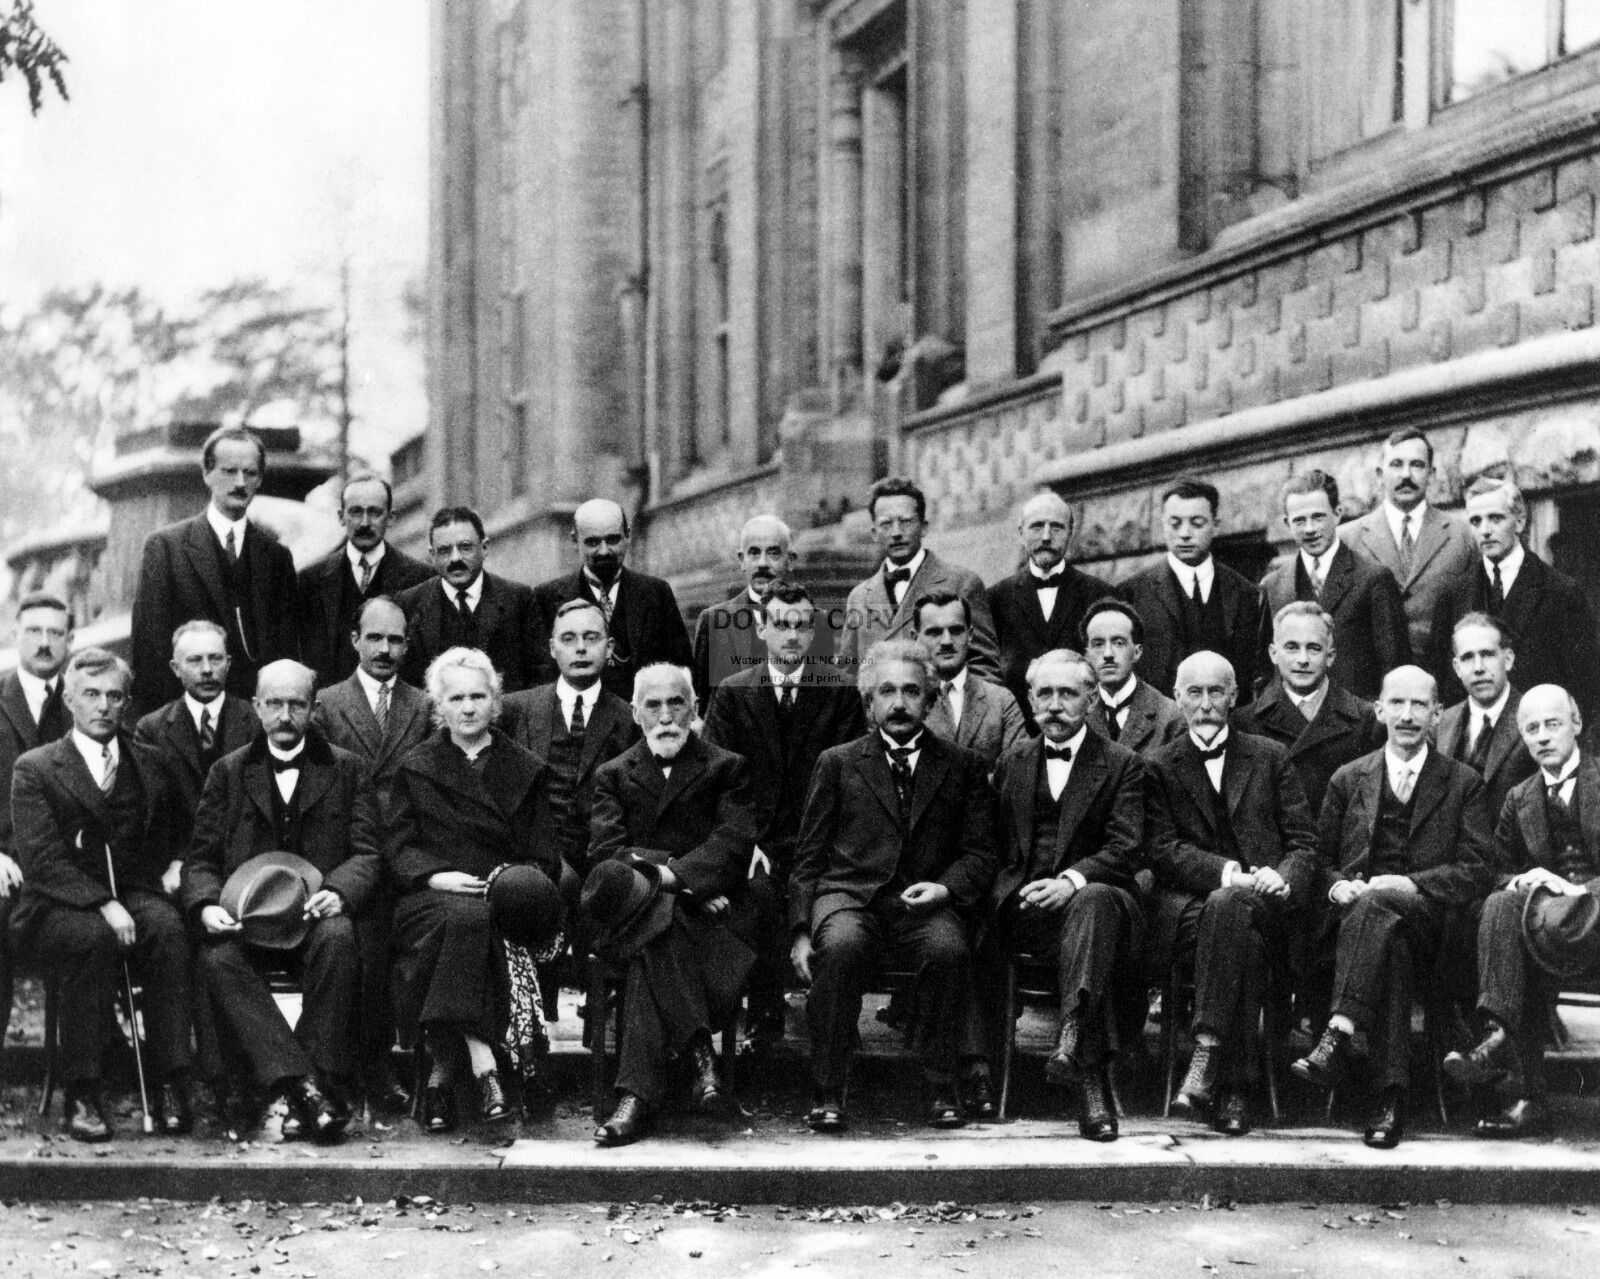 EINSTEIN ATTENDS 1927 SOLVAY CONFERENCE ON QUANTUM MECHANICS 8X10 PHOTO (AA-098)